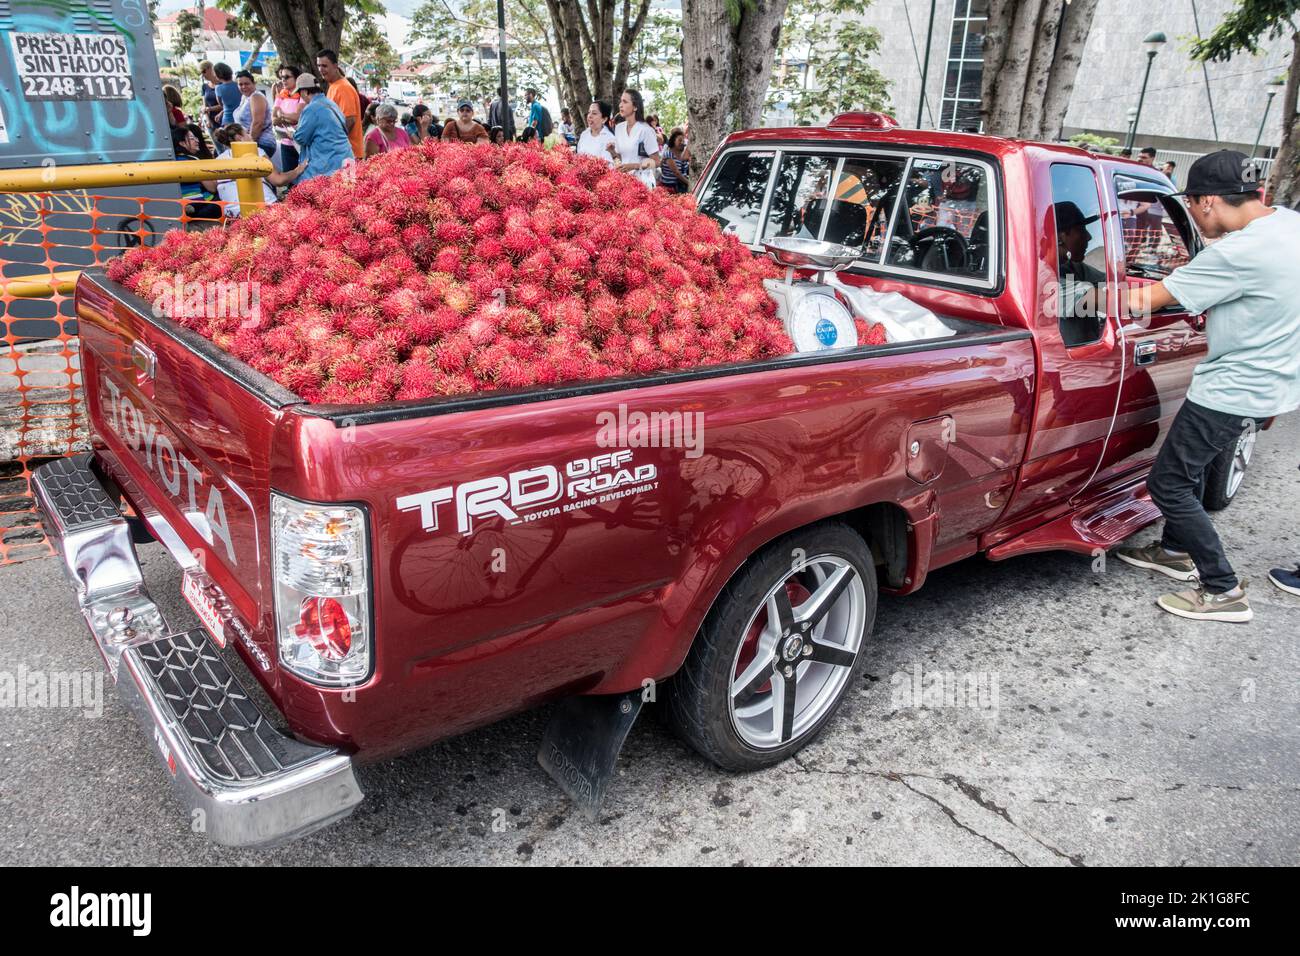 A pick-up truck filled with the fruit Rambutan (Nephelium lappaceum) for sale in San José, Costa Rica. Stock Photo